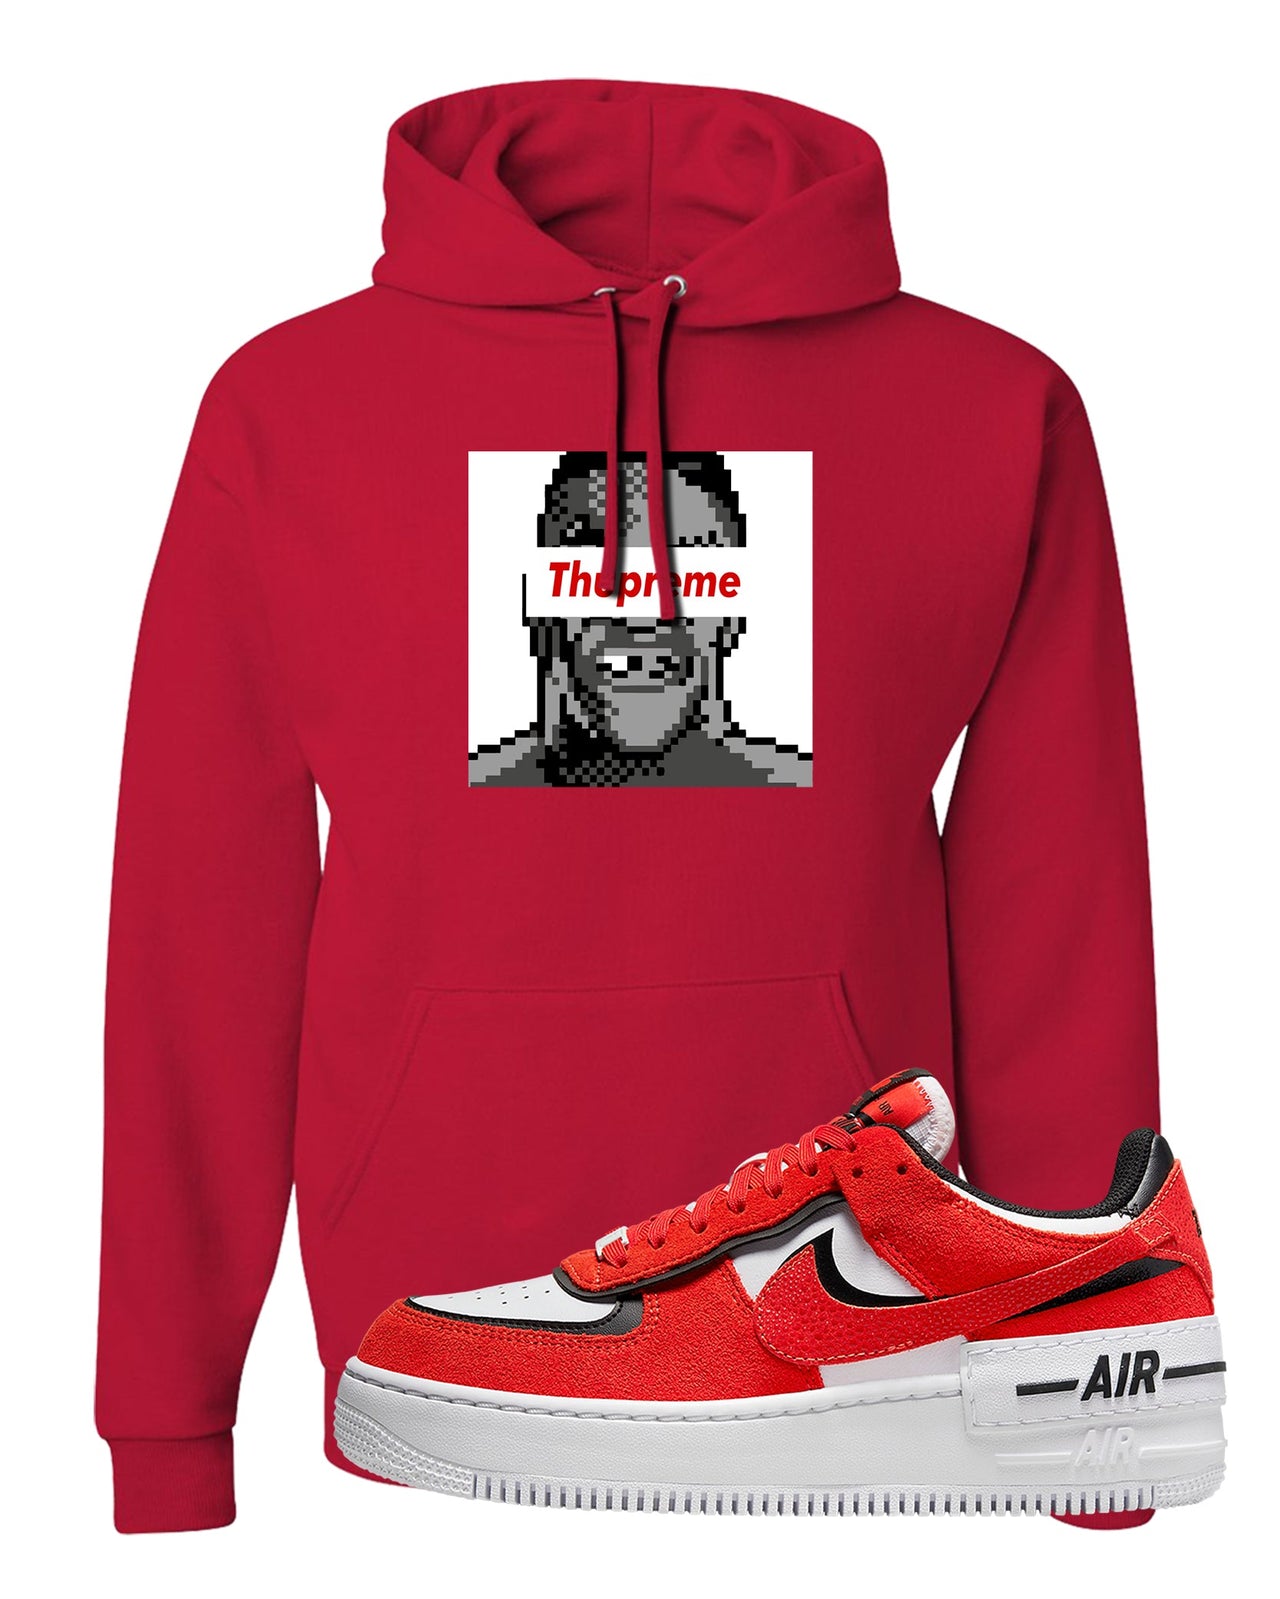 Shadow Chicago AF 1s Hoodie | Thupreme, Red